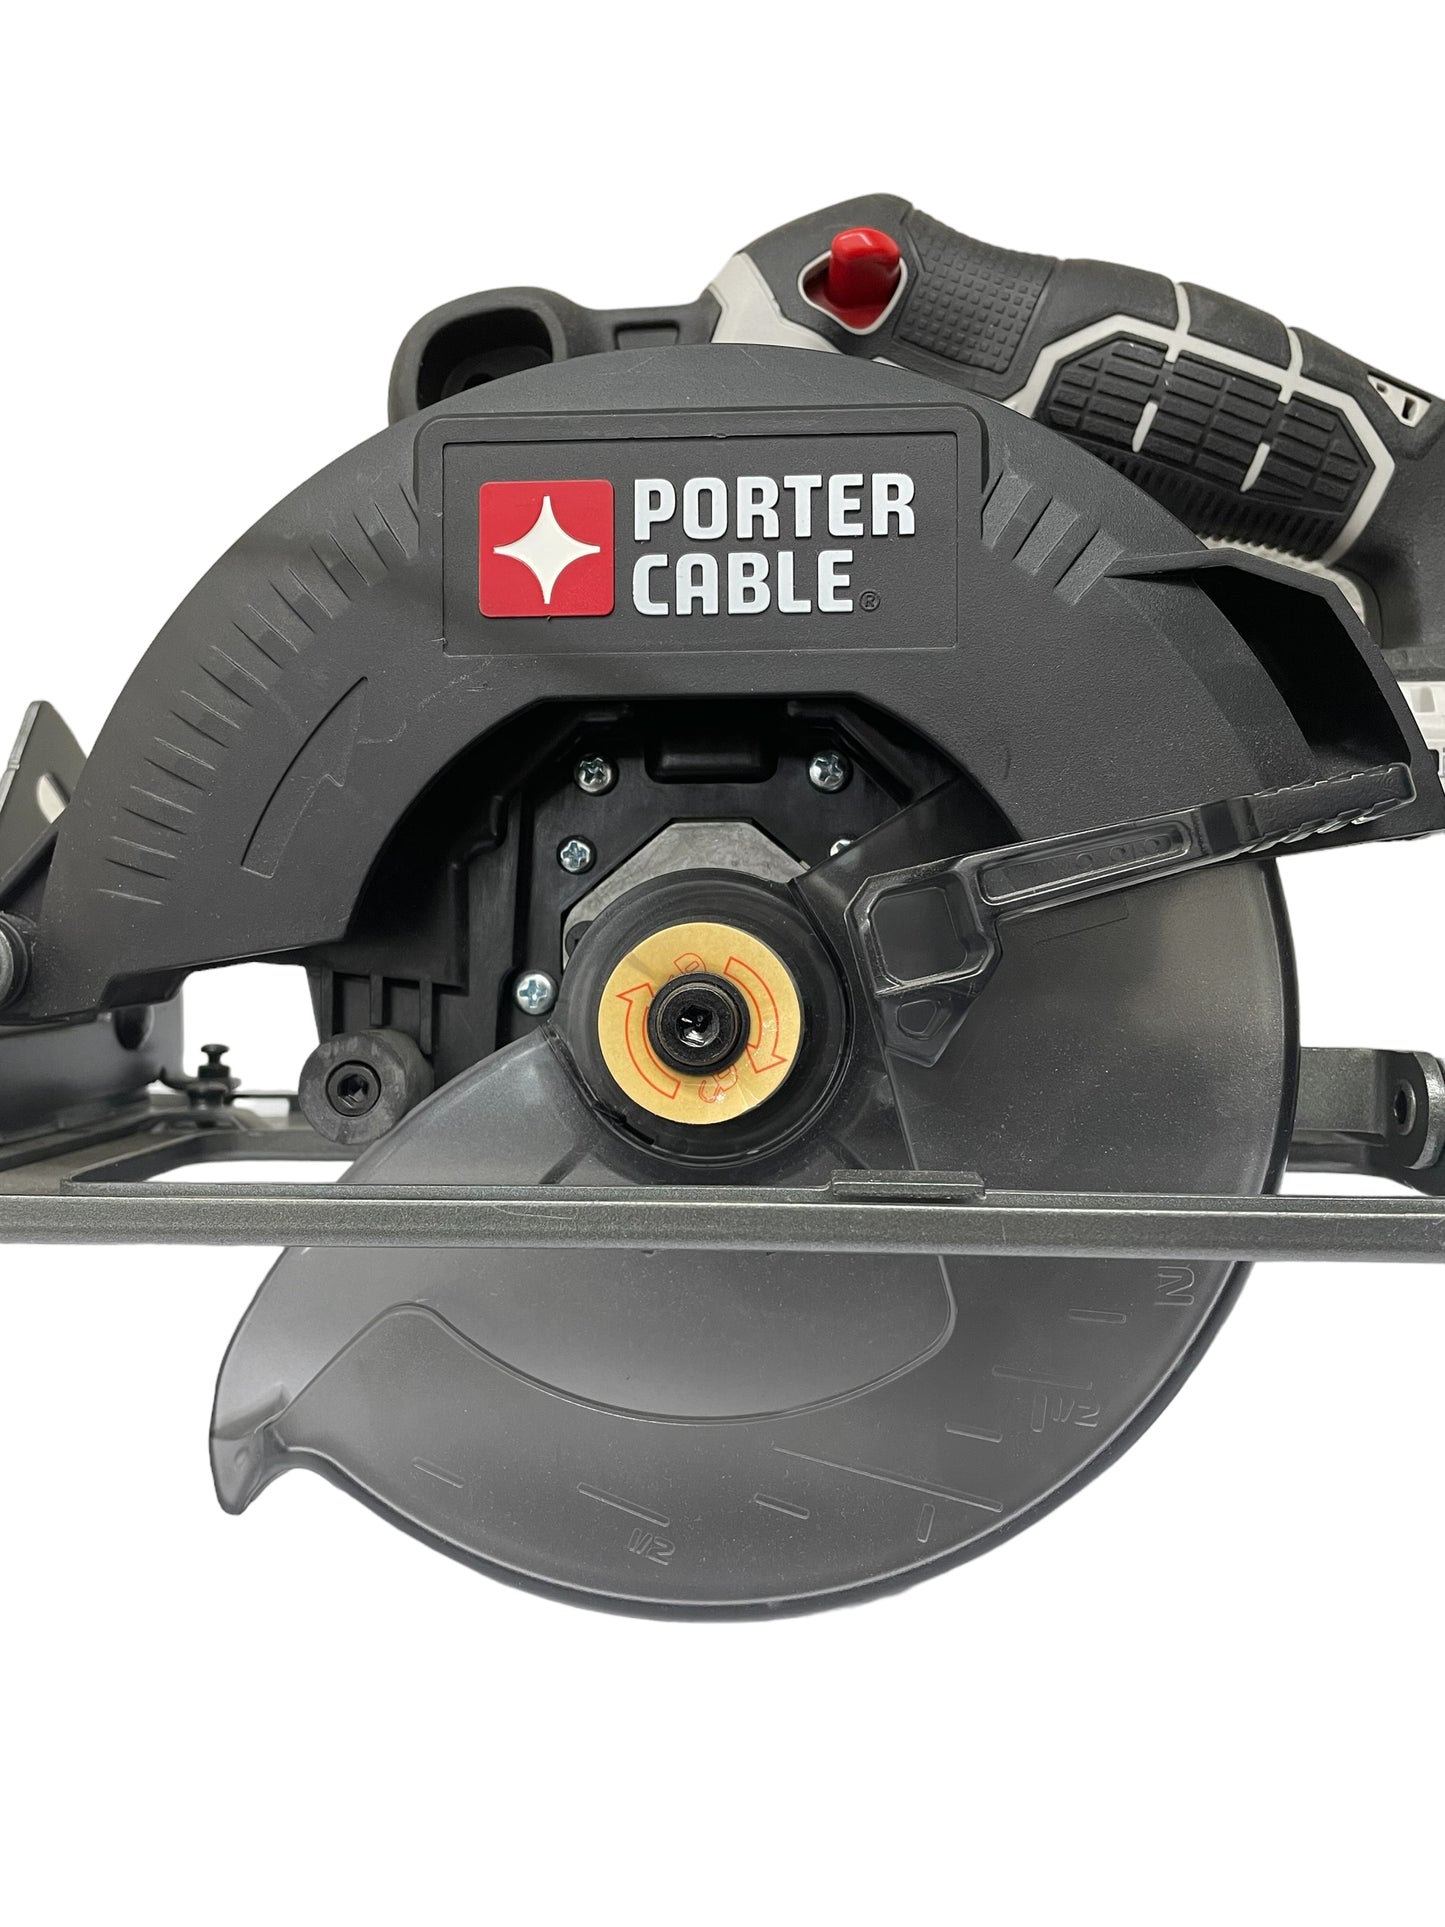 Porter Cable PCC660 6-1/2 in. Cordless Circular Saw (Local pick-up only)